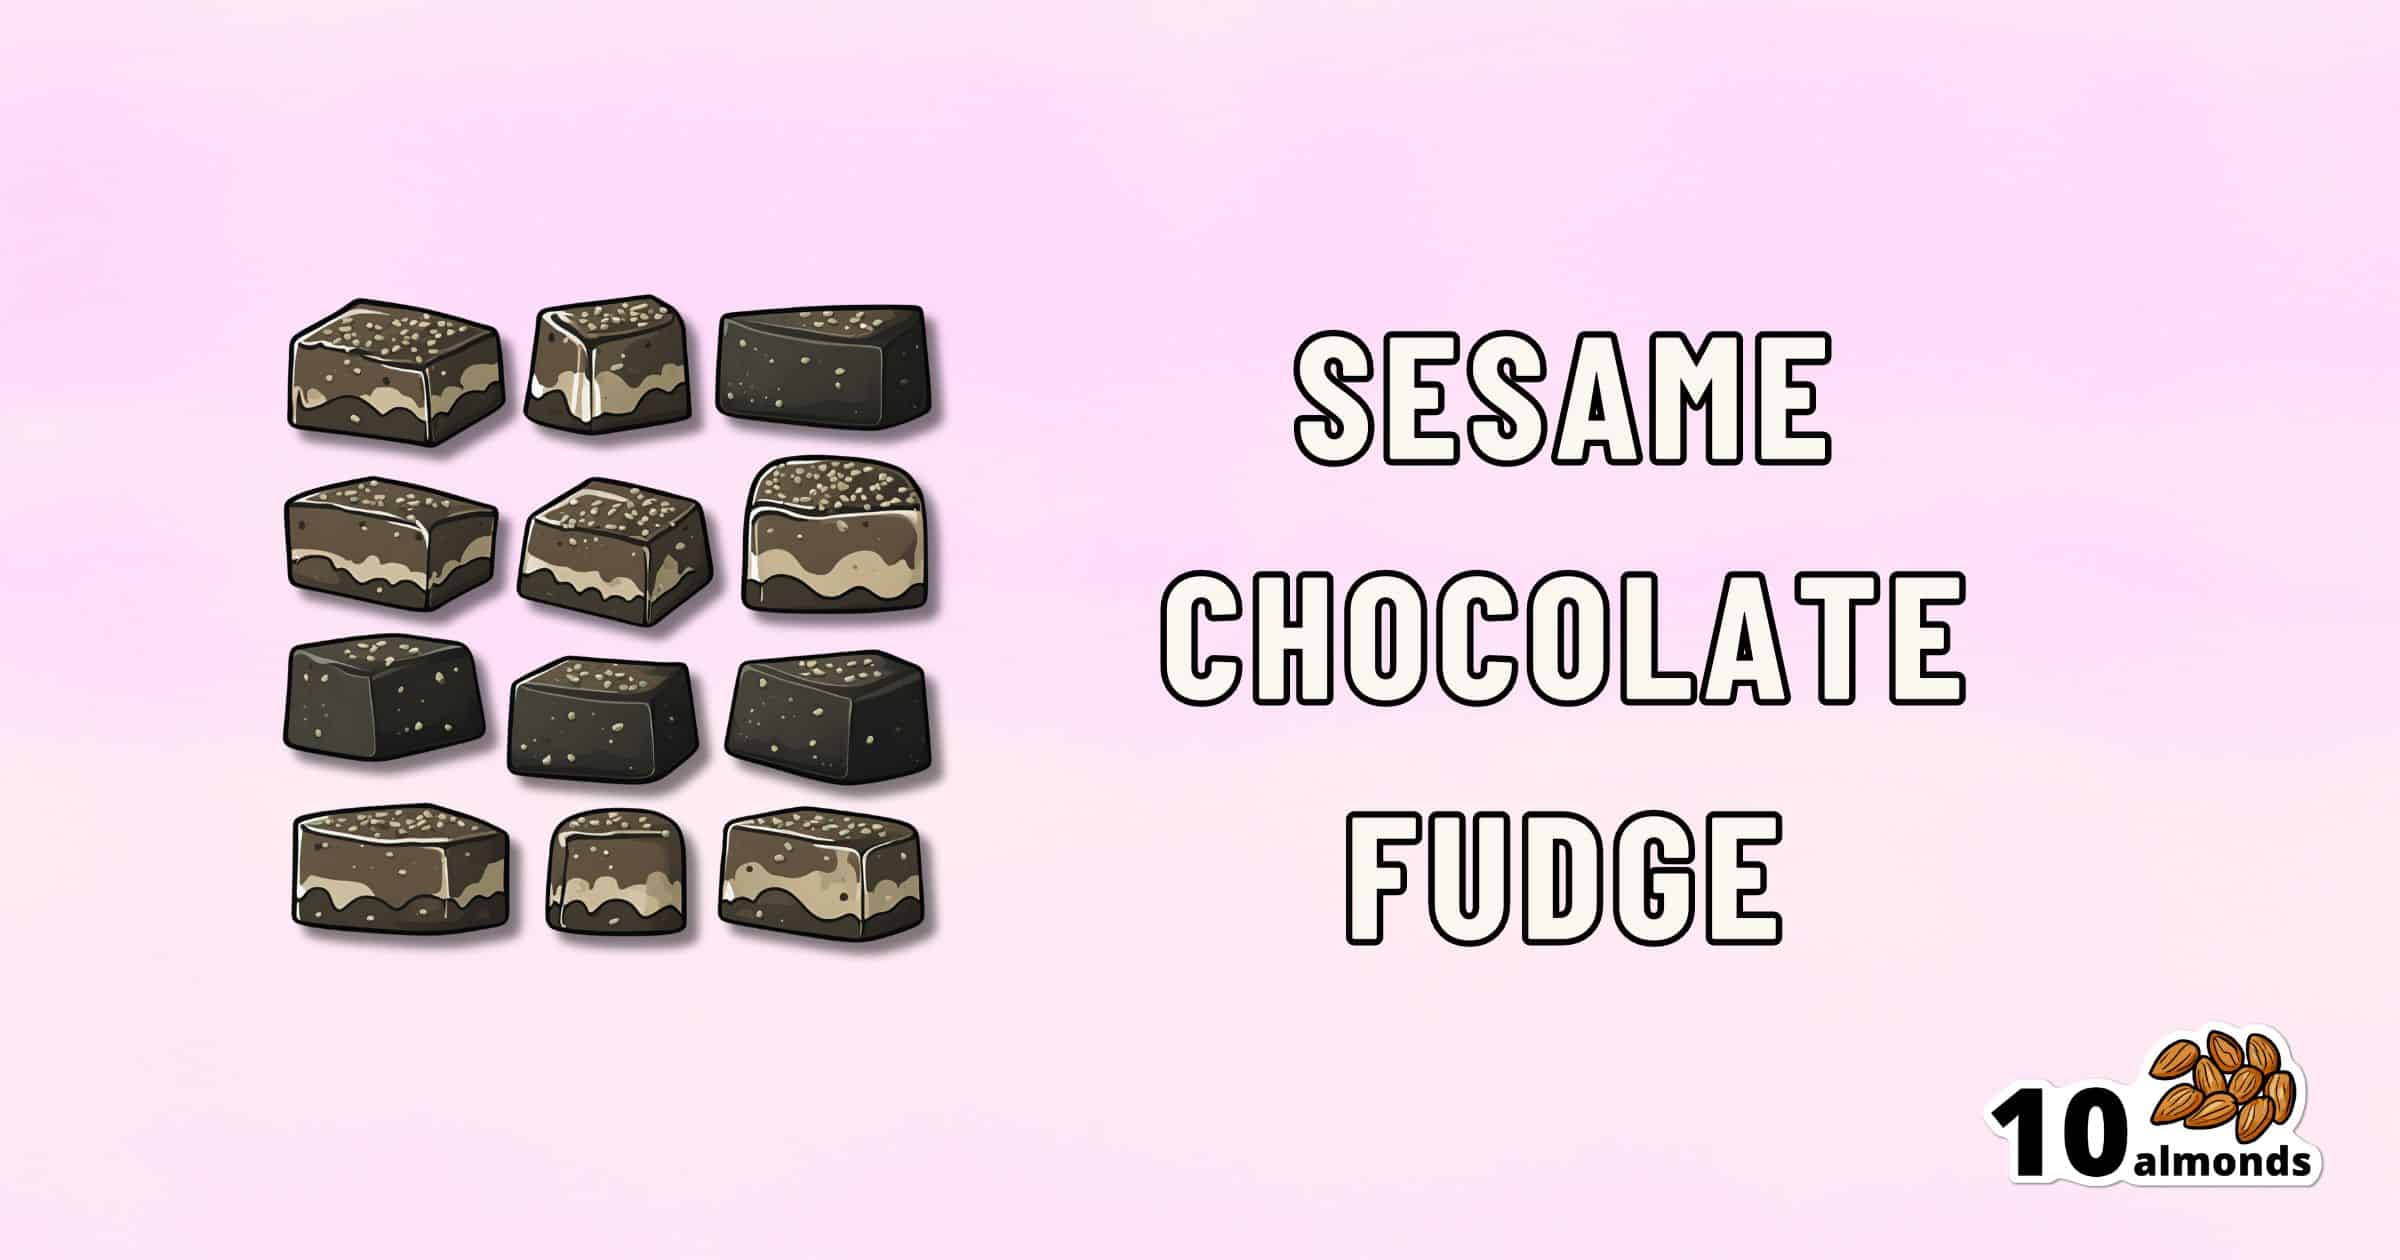 Image of several pieces of decadent sesame chocolate fudge against a pink background. The text "Sesame Chocolate Fudge" is displayed prominently on the right side, with a logo of "10 almonds" featuring an illustration of almonds at the bottom right.